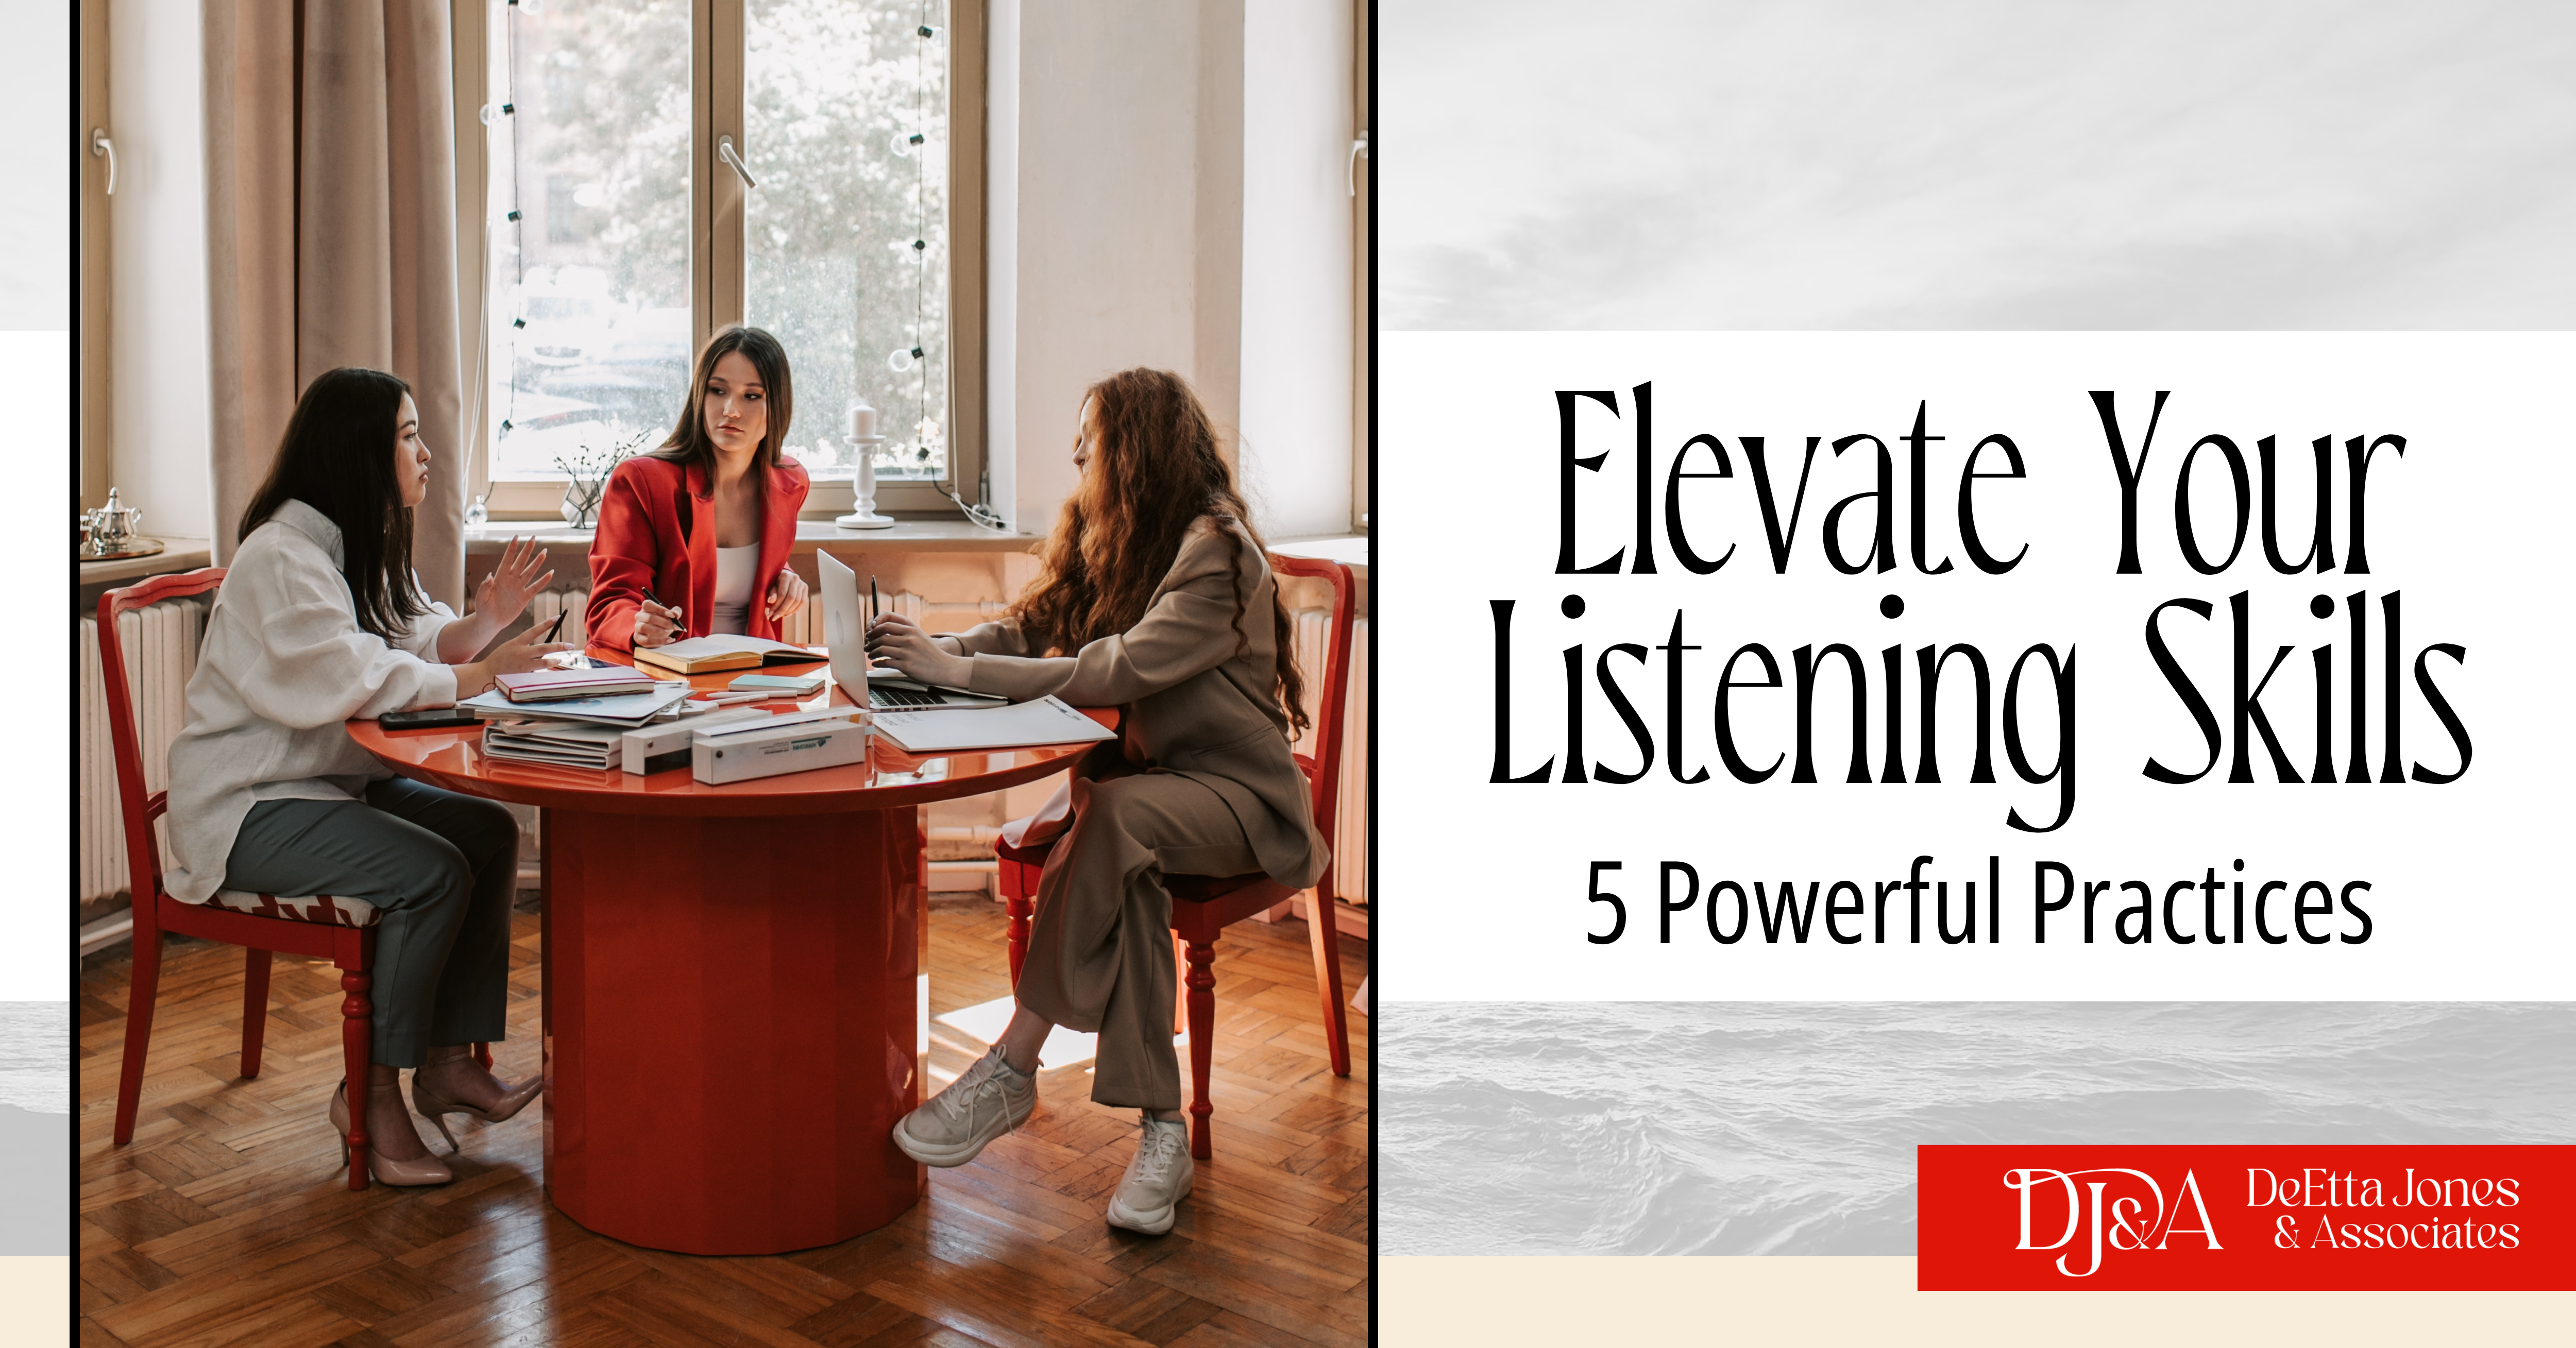 Elevate your Listening Skills - 5 Powerful Practices